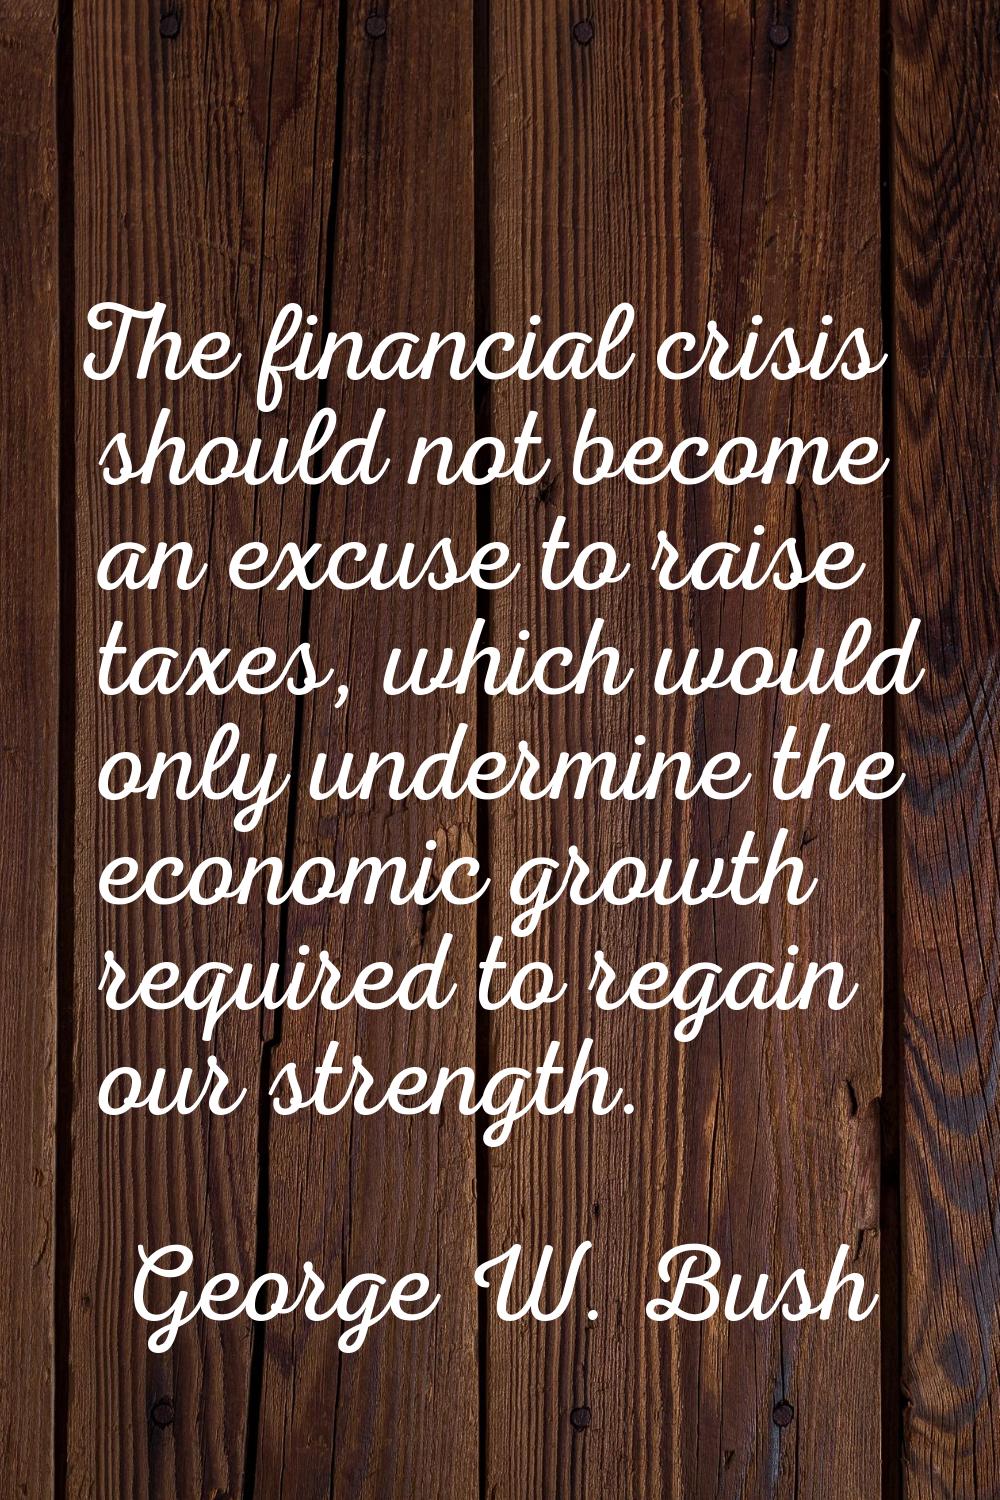 The financial crisis should not become an excuse to raise taxes, which would only undermine the eco